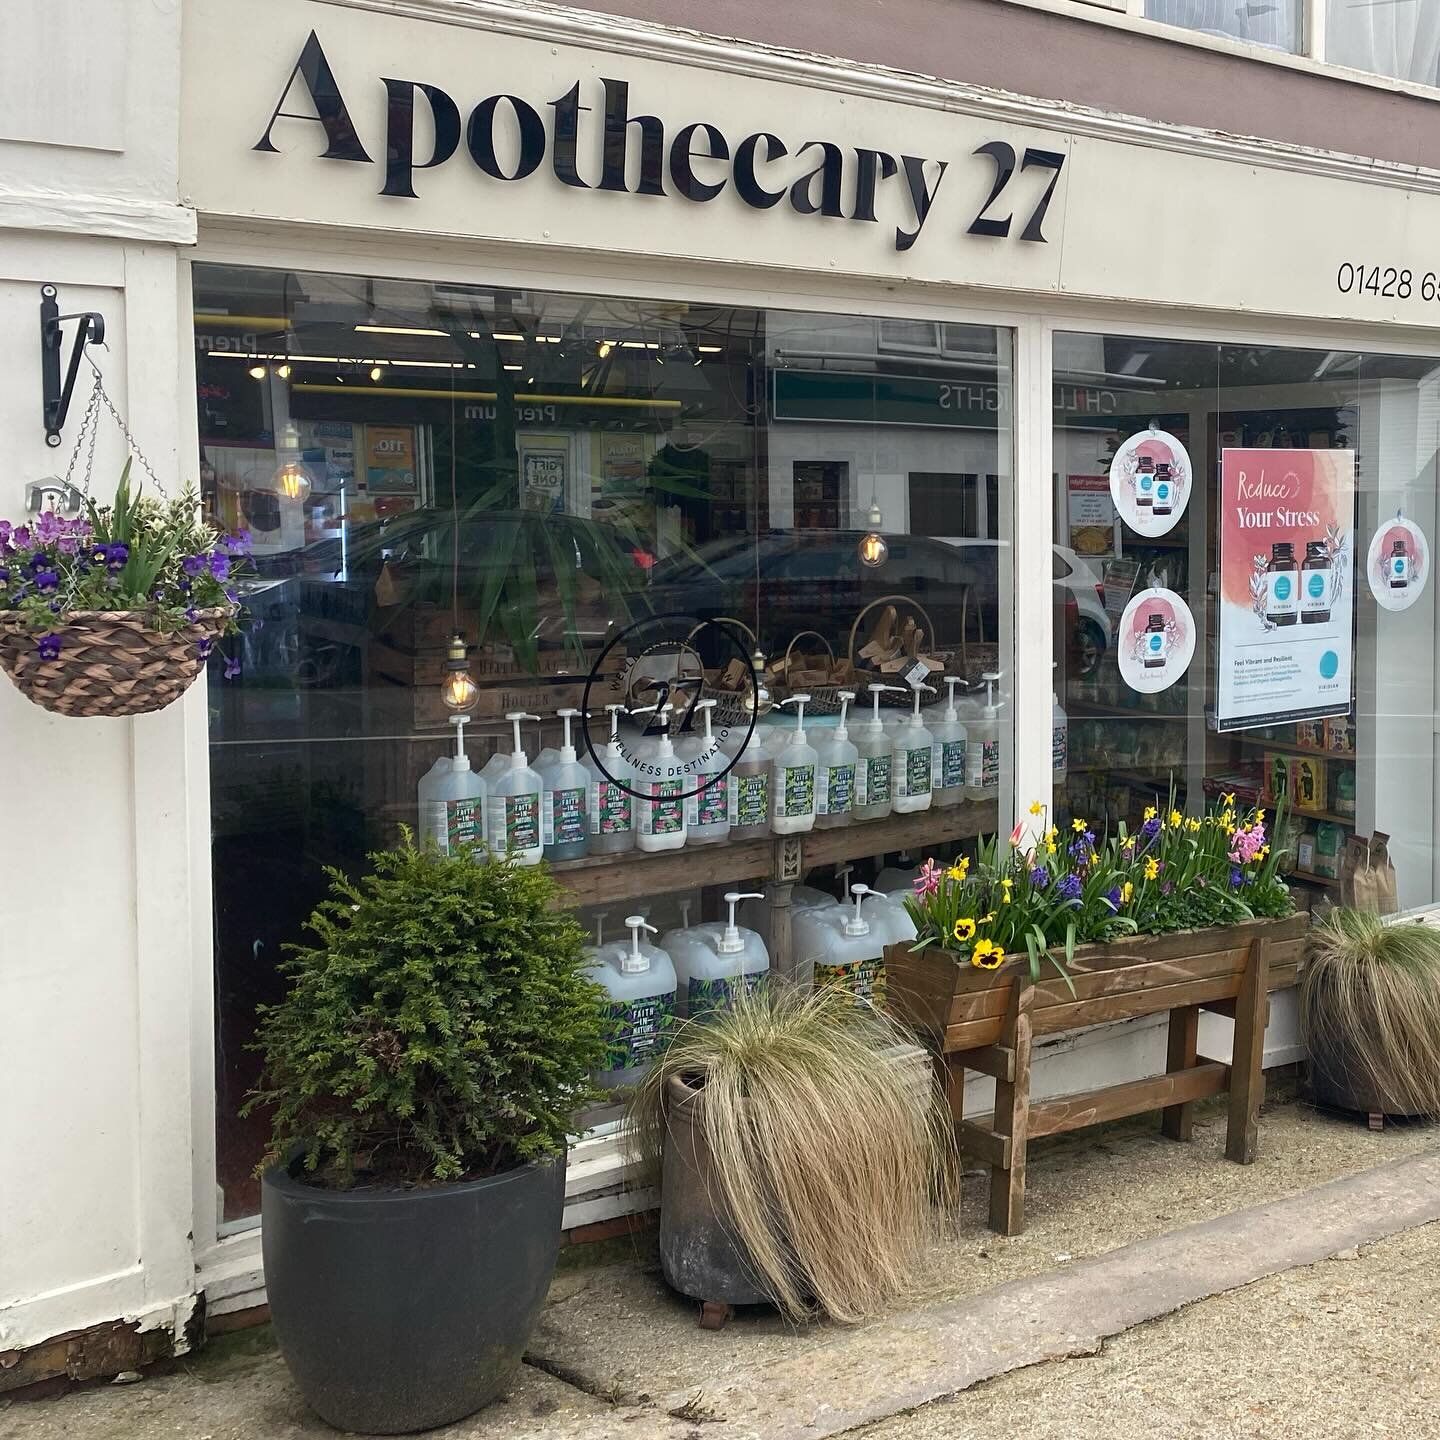 Store visits are a rare but joyful part of our job. On this occasion we were hand delivering our free Winter Sample Box to Buyers&rsquo; Club member @apothecary27 in Haslemere, Surrey. Such a lovely community hub 💚

#didsomeonesaysamples #buyersclub